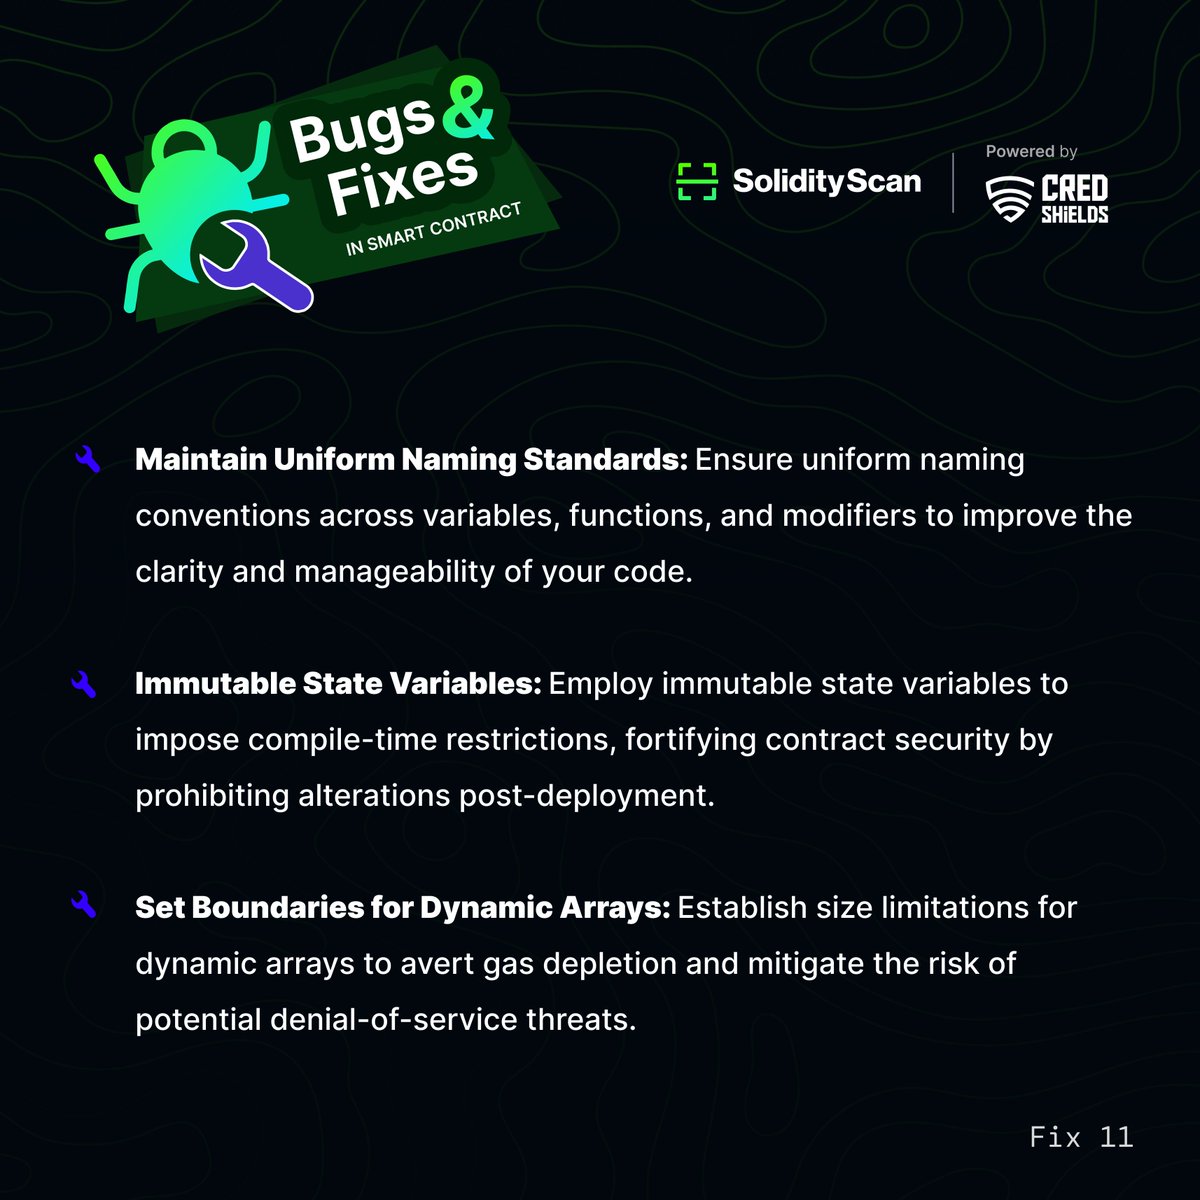 Bugs bugging you? Let's fix it together! Stay tuned for expert solutions and smooth sailing in your code. #BugHunt #CyberSecurity #Web3